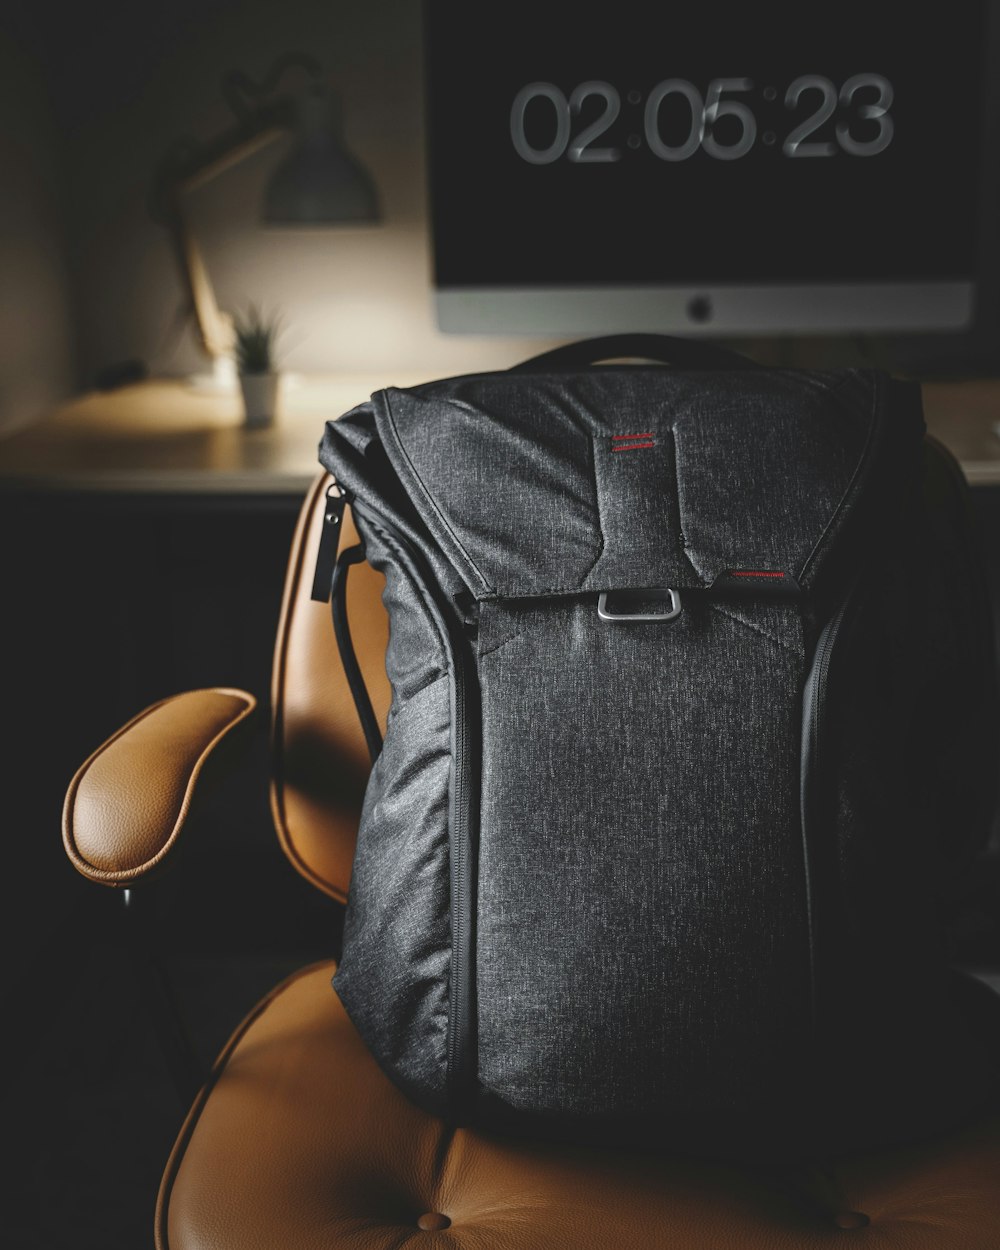 black backpack on brown leather armchair